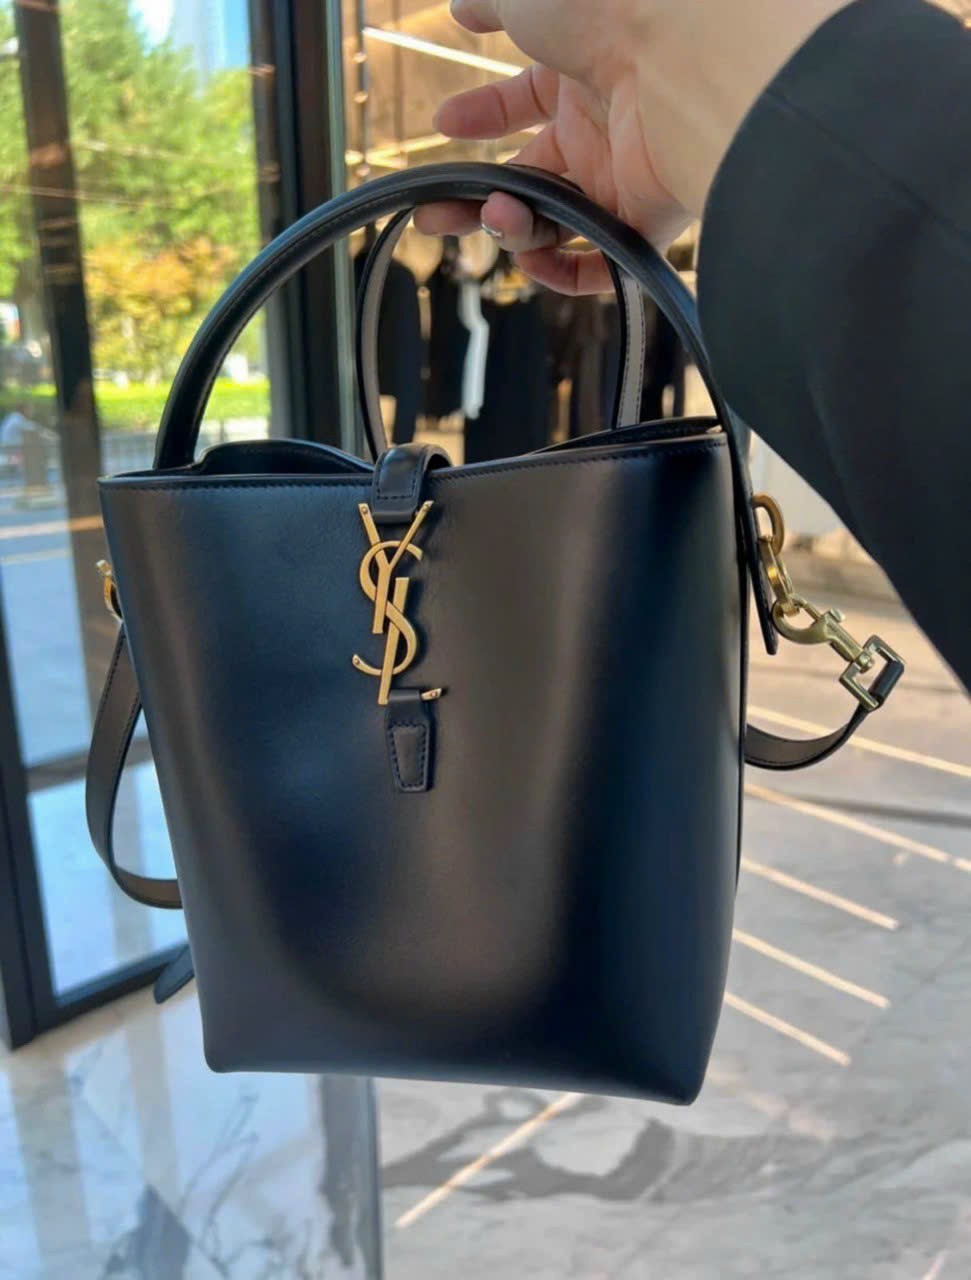 Saint Laurent Le 37 Small Leather Bucket Bag in Black